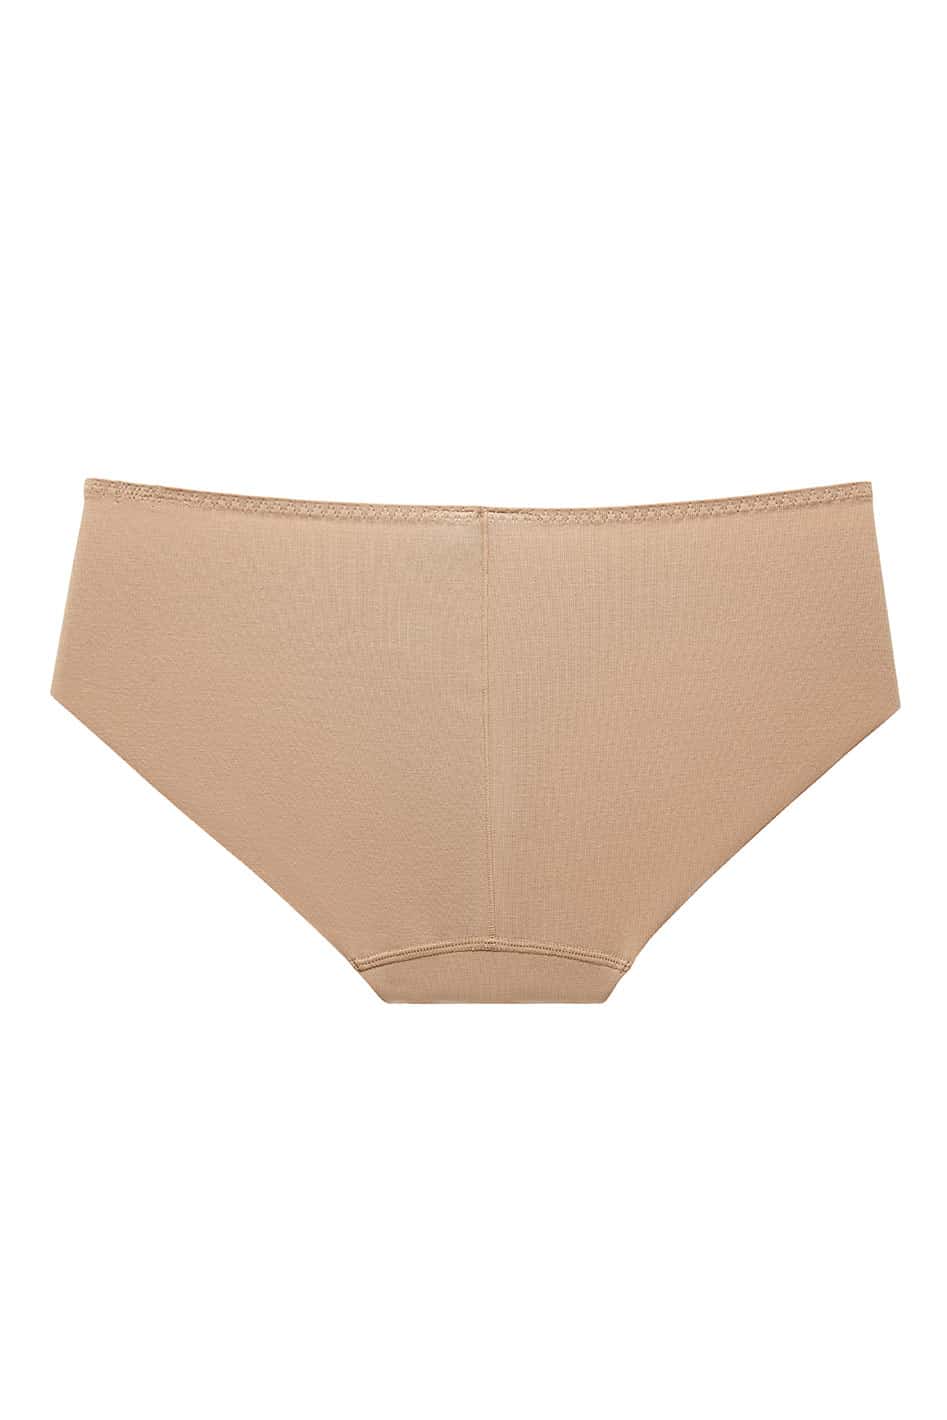 YIONTAN Women's Low Rise Underwear Seamless Quick Dry Panties